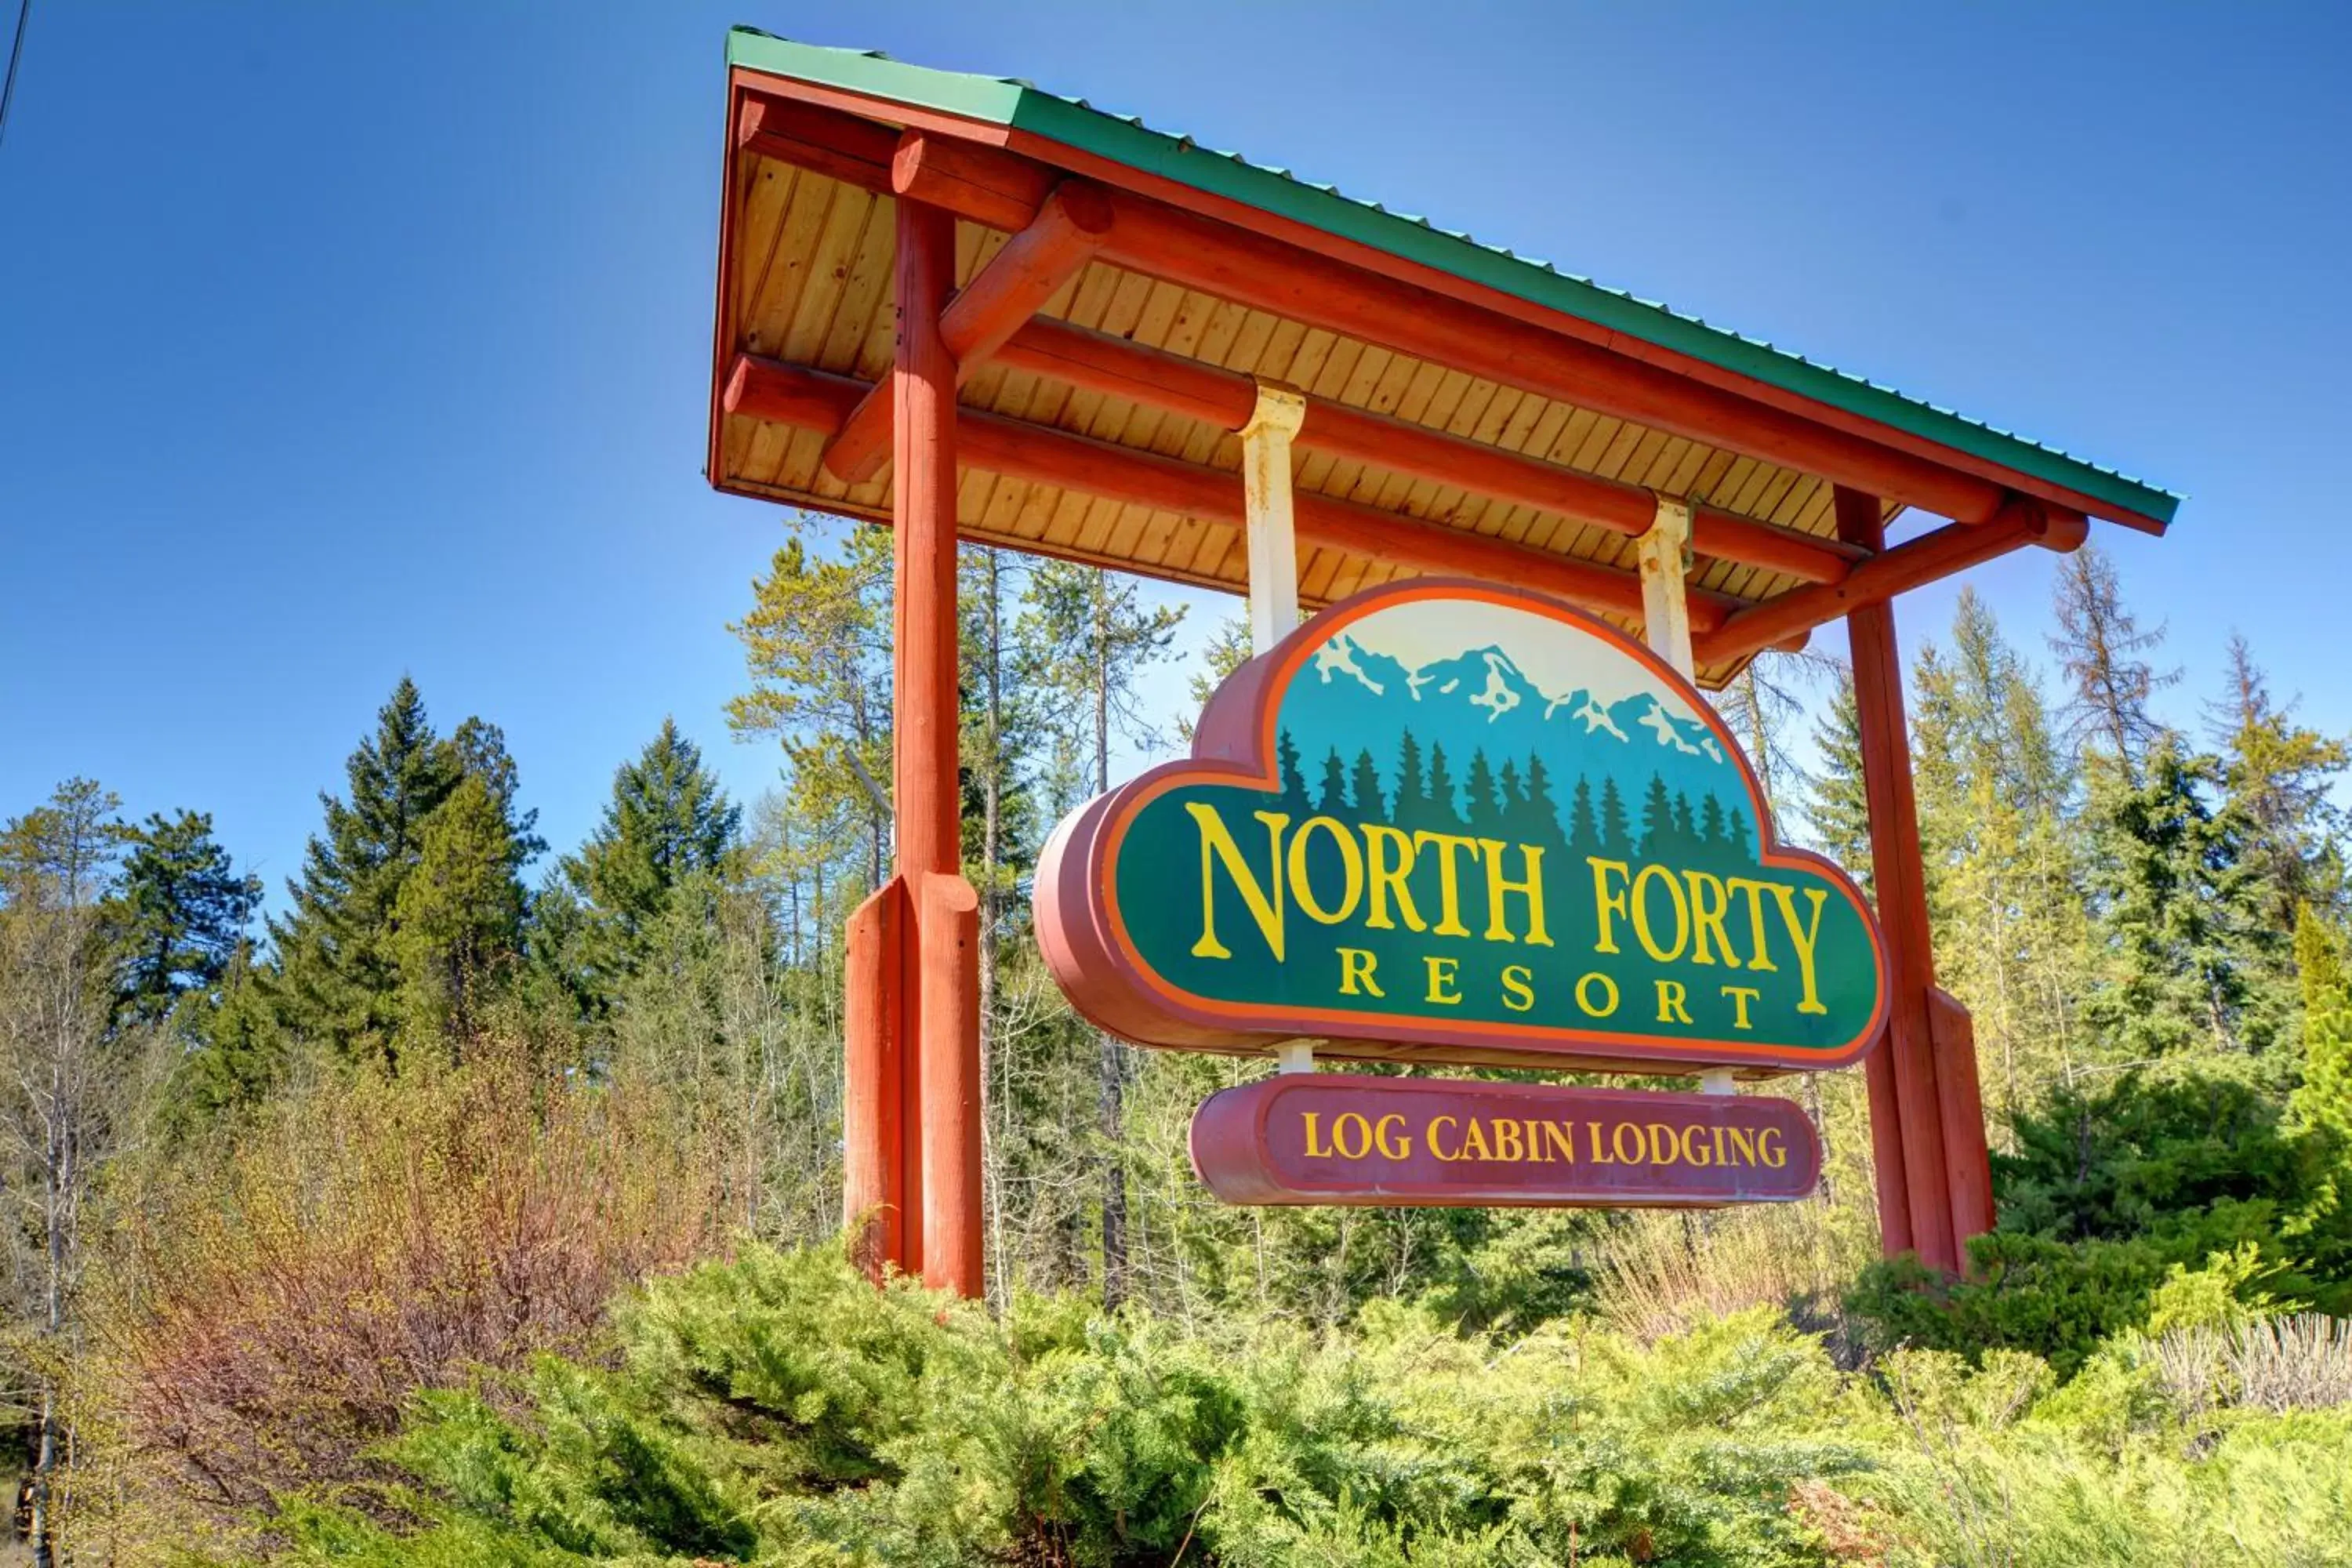 Property logo or sign in North Forty Resort